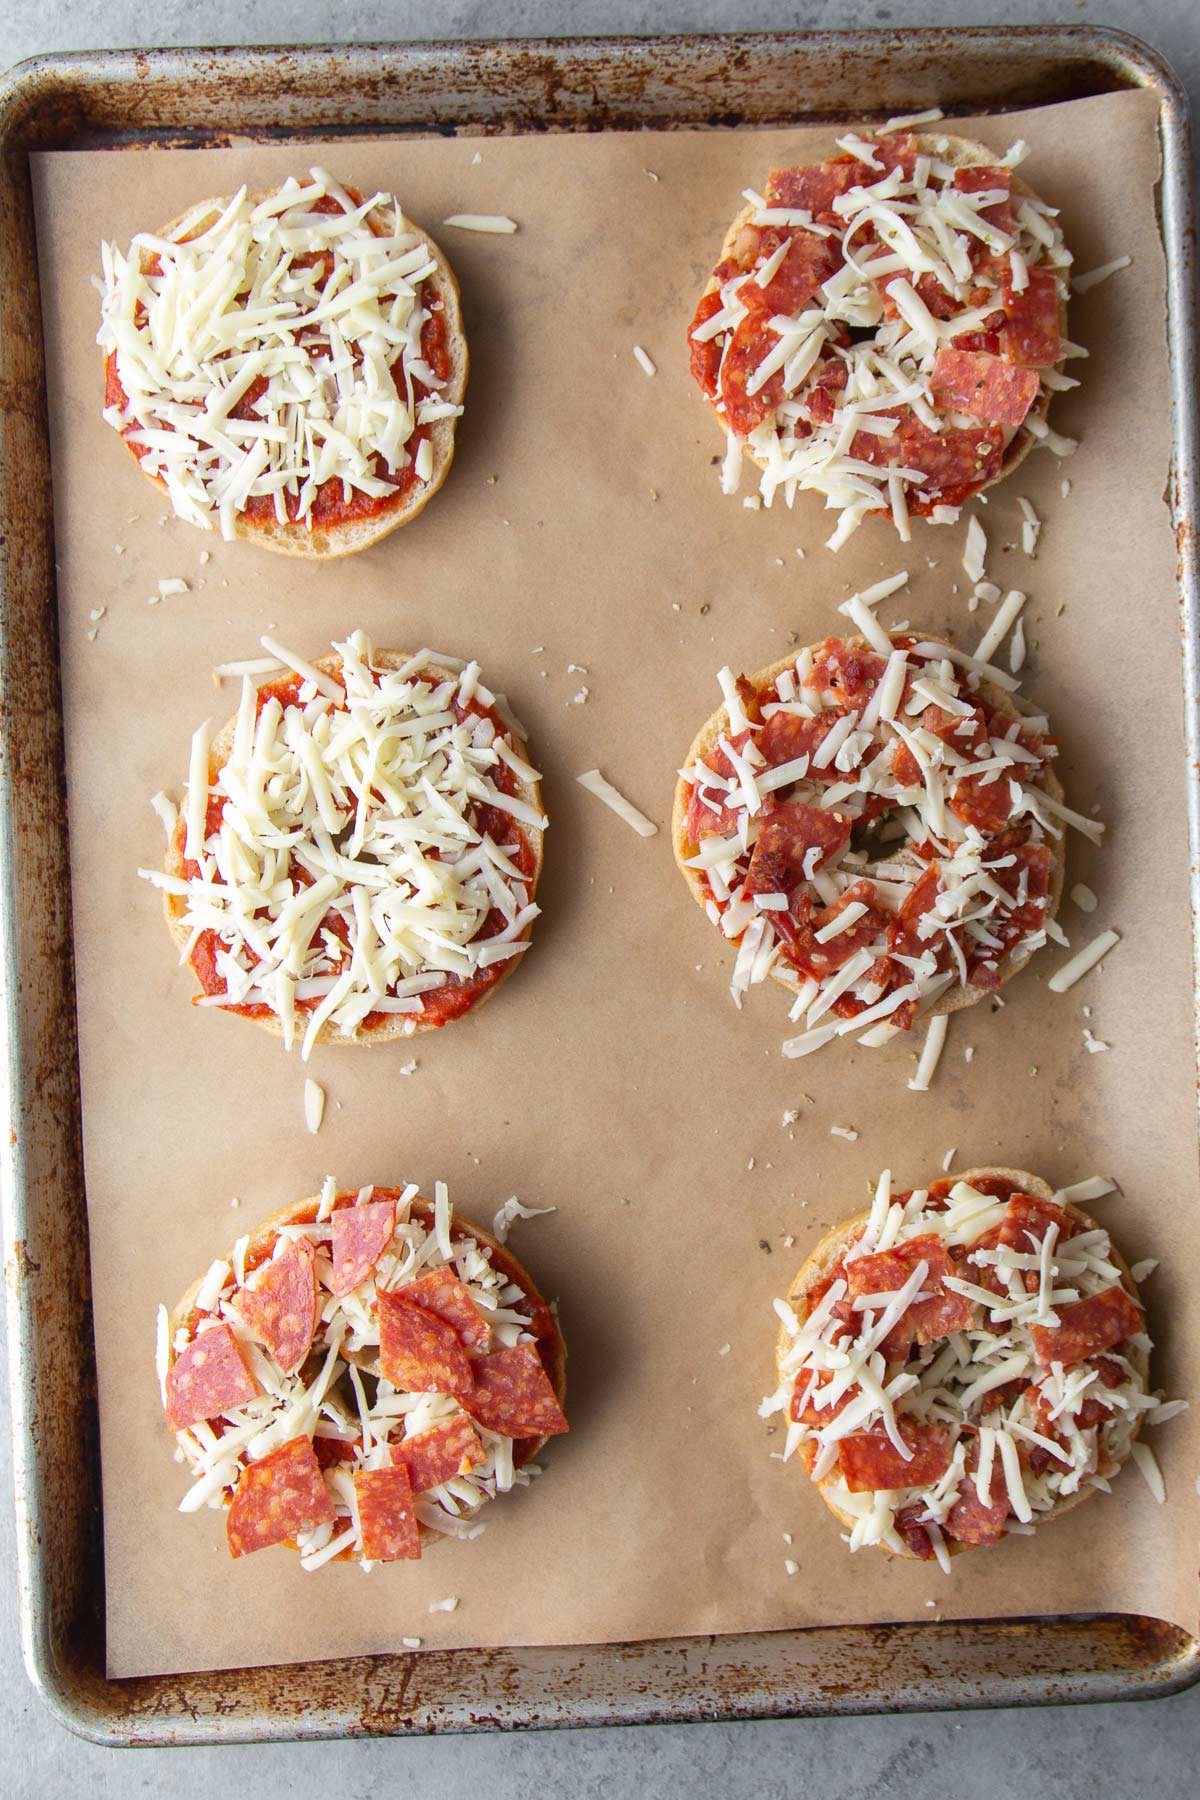 assembled pizza bagels ready to be frozen.